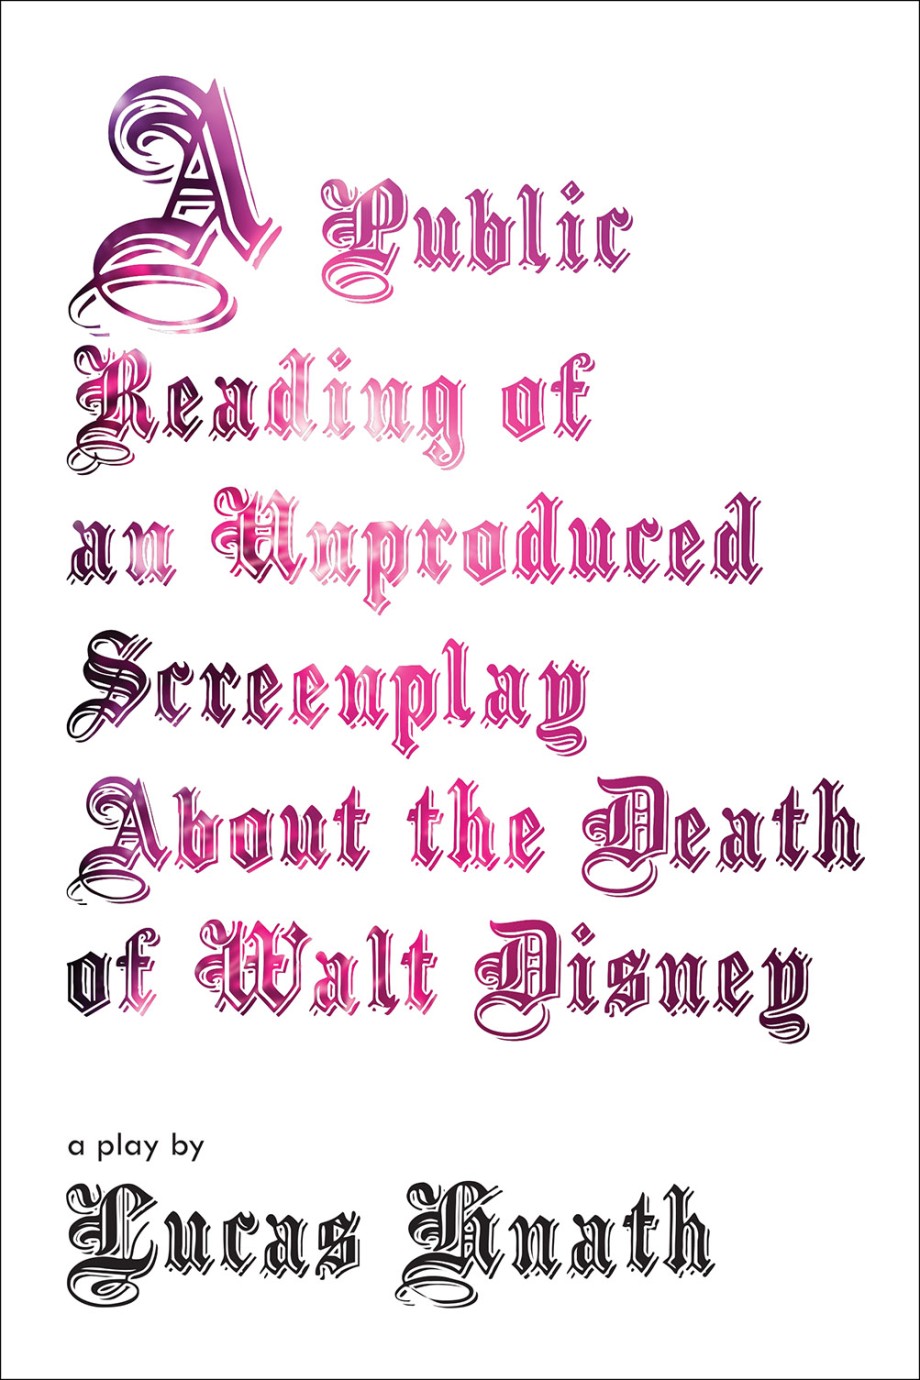 Public Reading of an Unproduced Screenplay About the Death of Walt Disney A Play